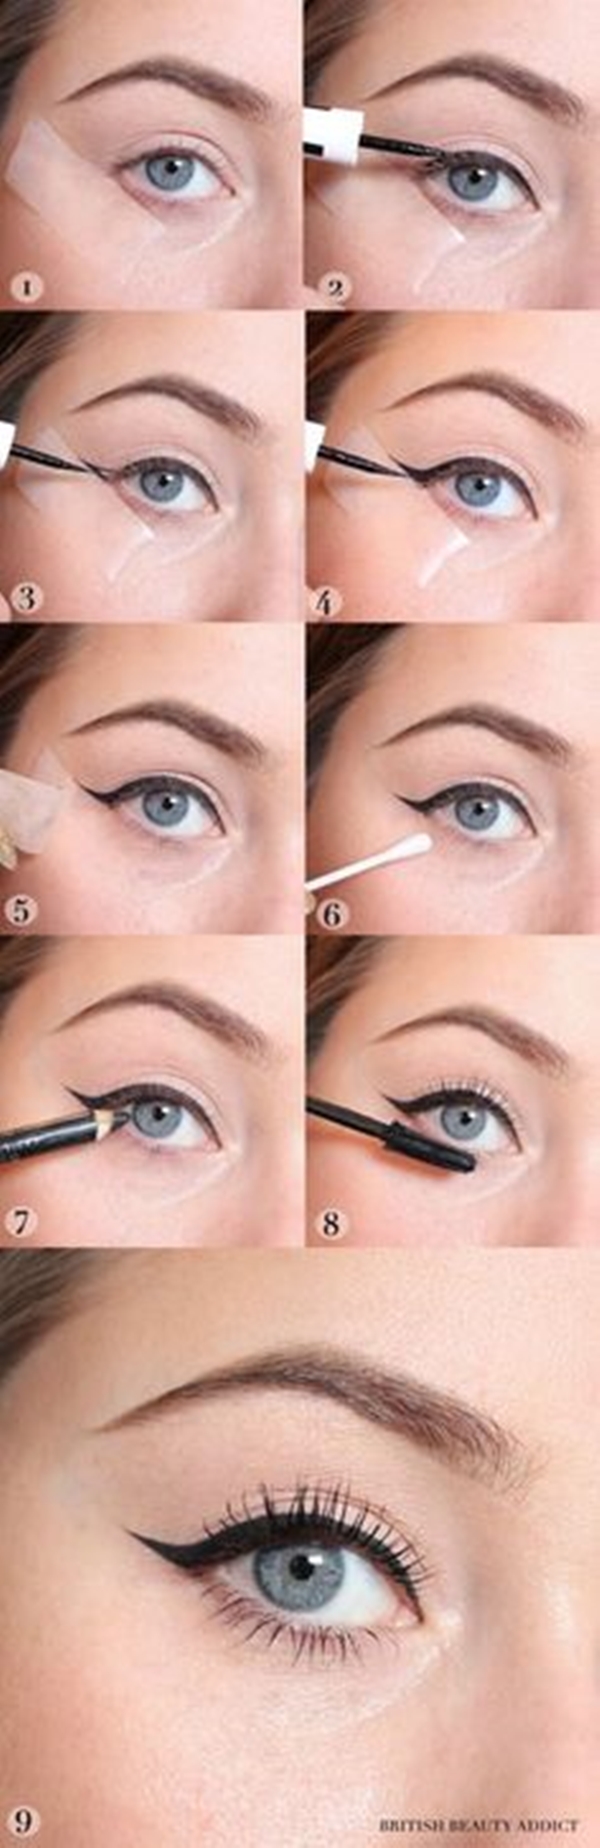 Quick-Makeup-Tips-For-Working-Women